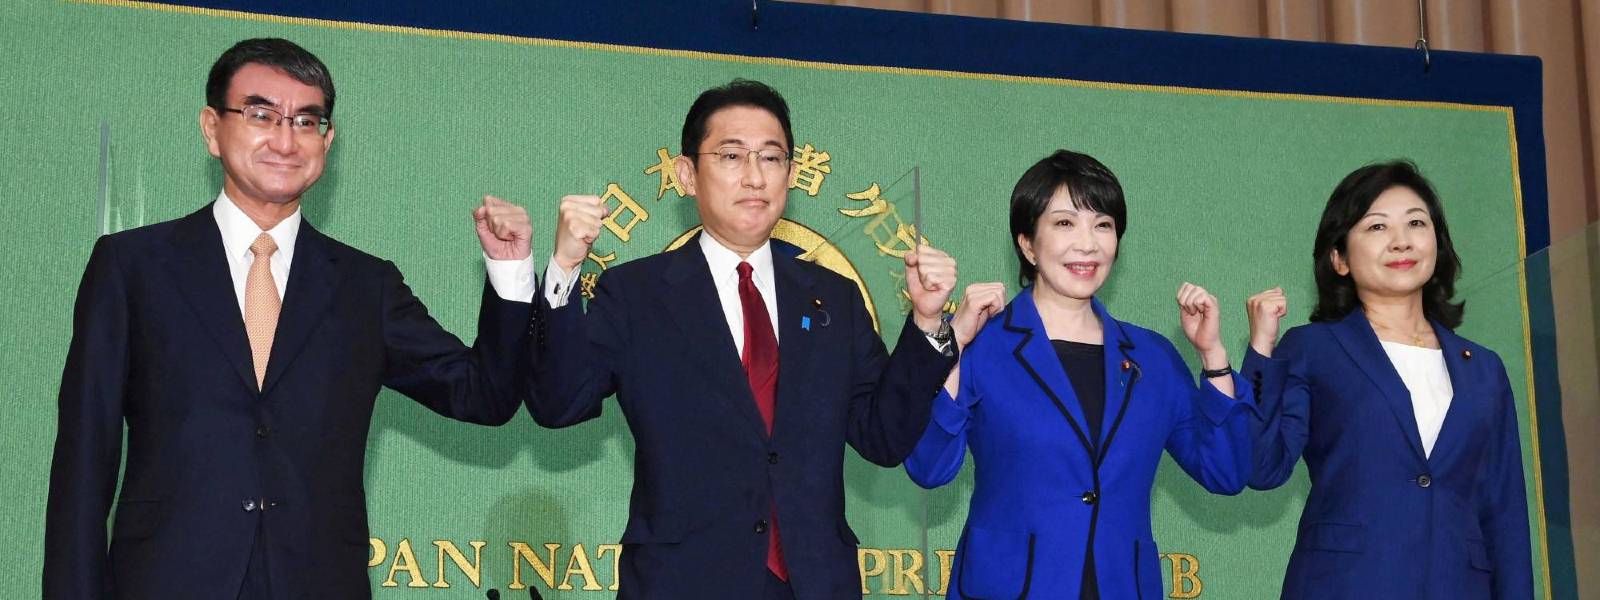 Japanese lawmakers commence vote for next PM